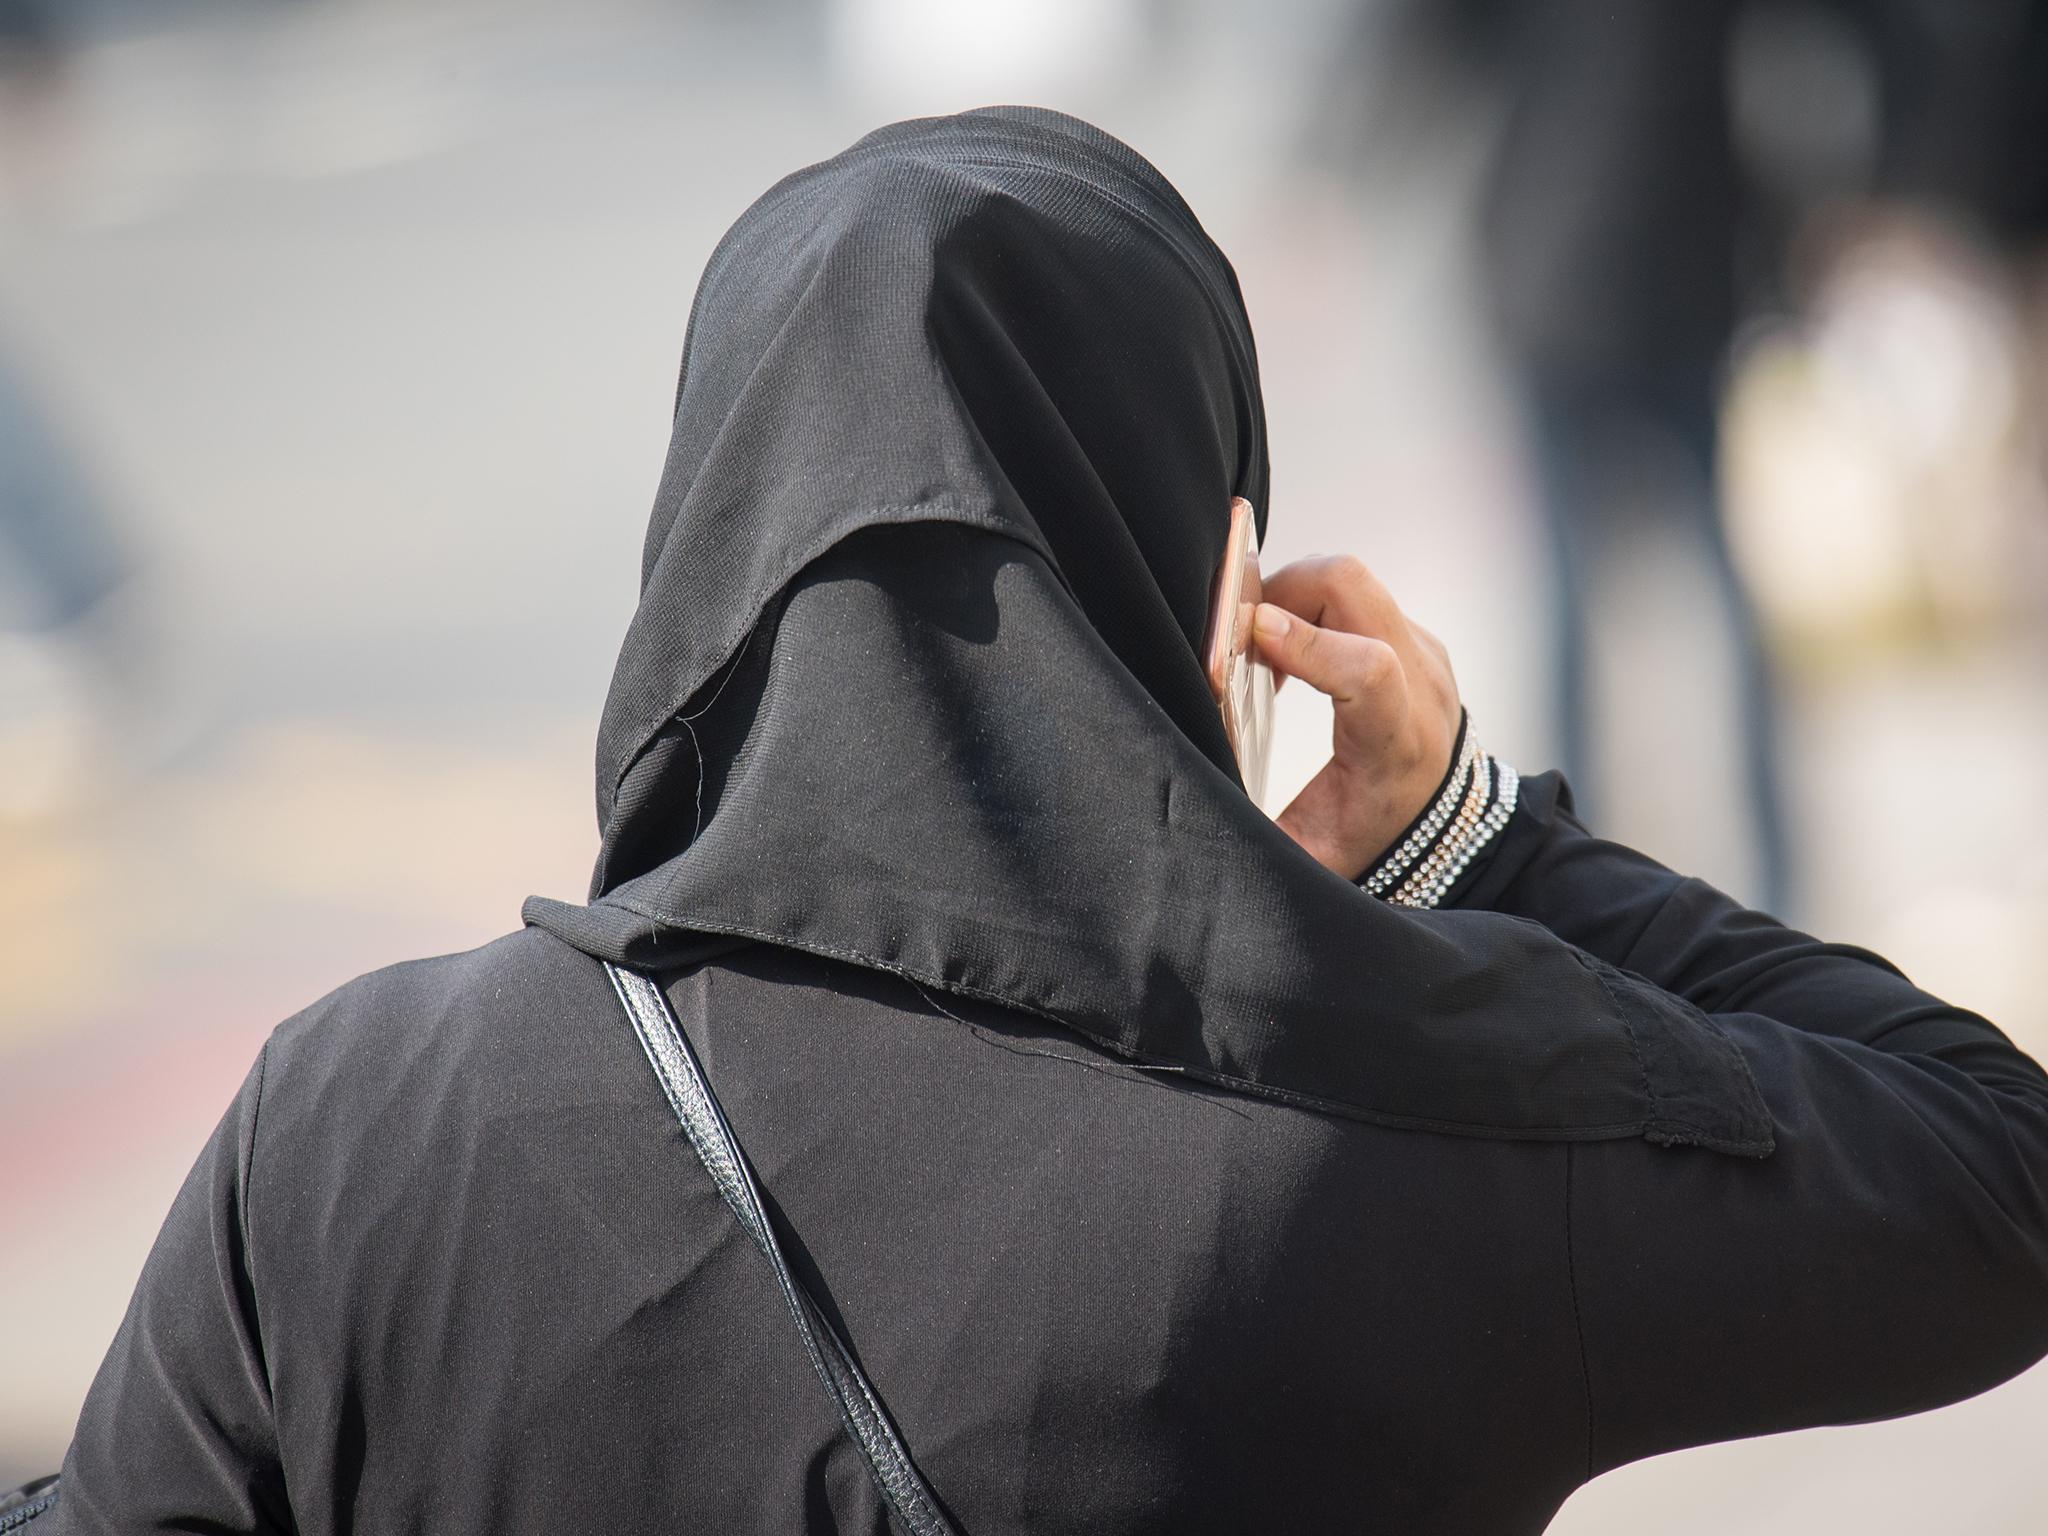 Ofsted has overstepped their remit when making comments about the hijab, union says